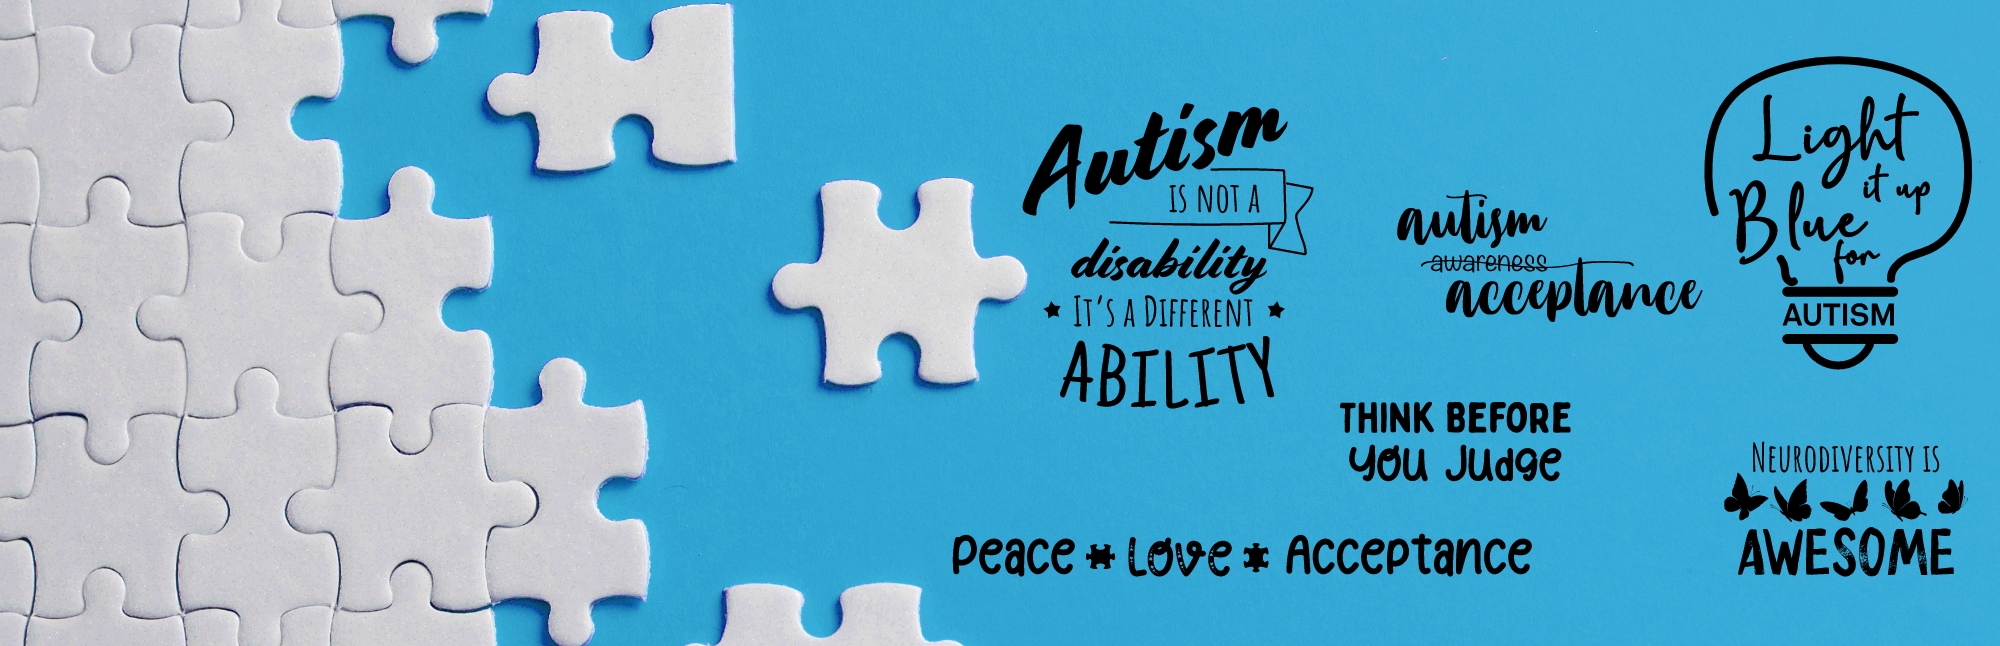 19 Autism Awareness Sayings & T-Shirt Design Ideas to Inspire Acceptance